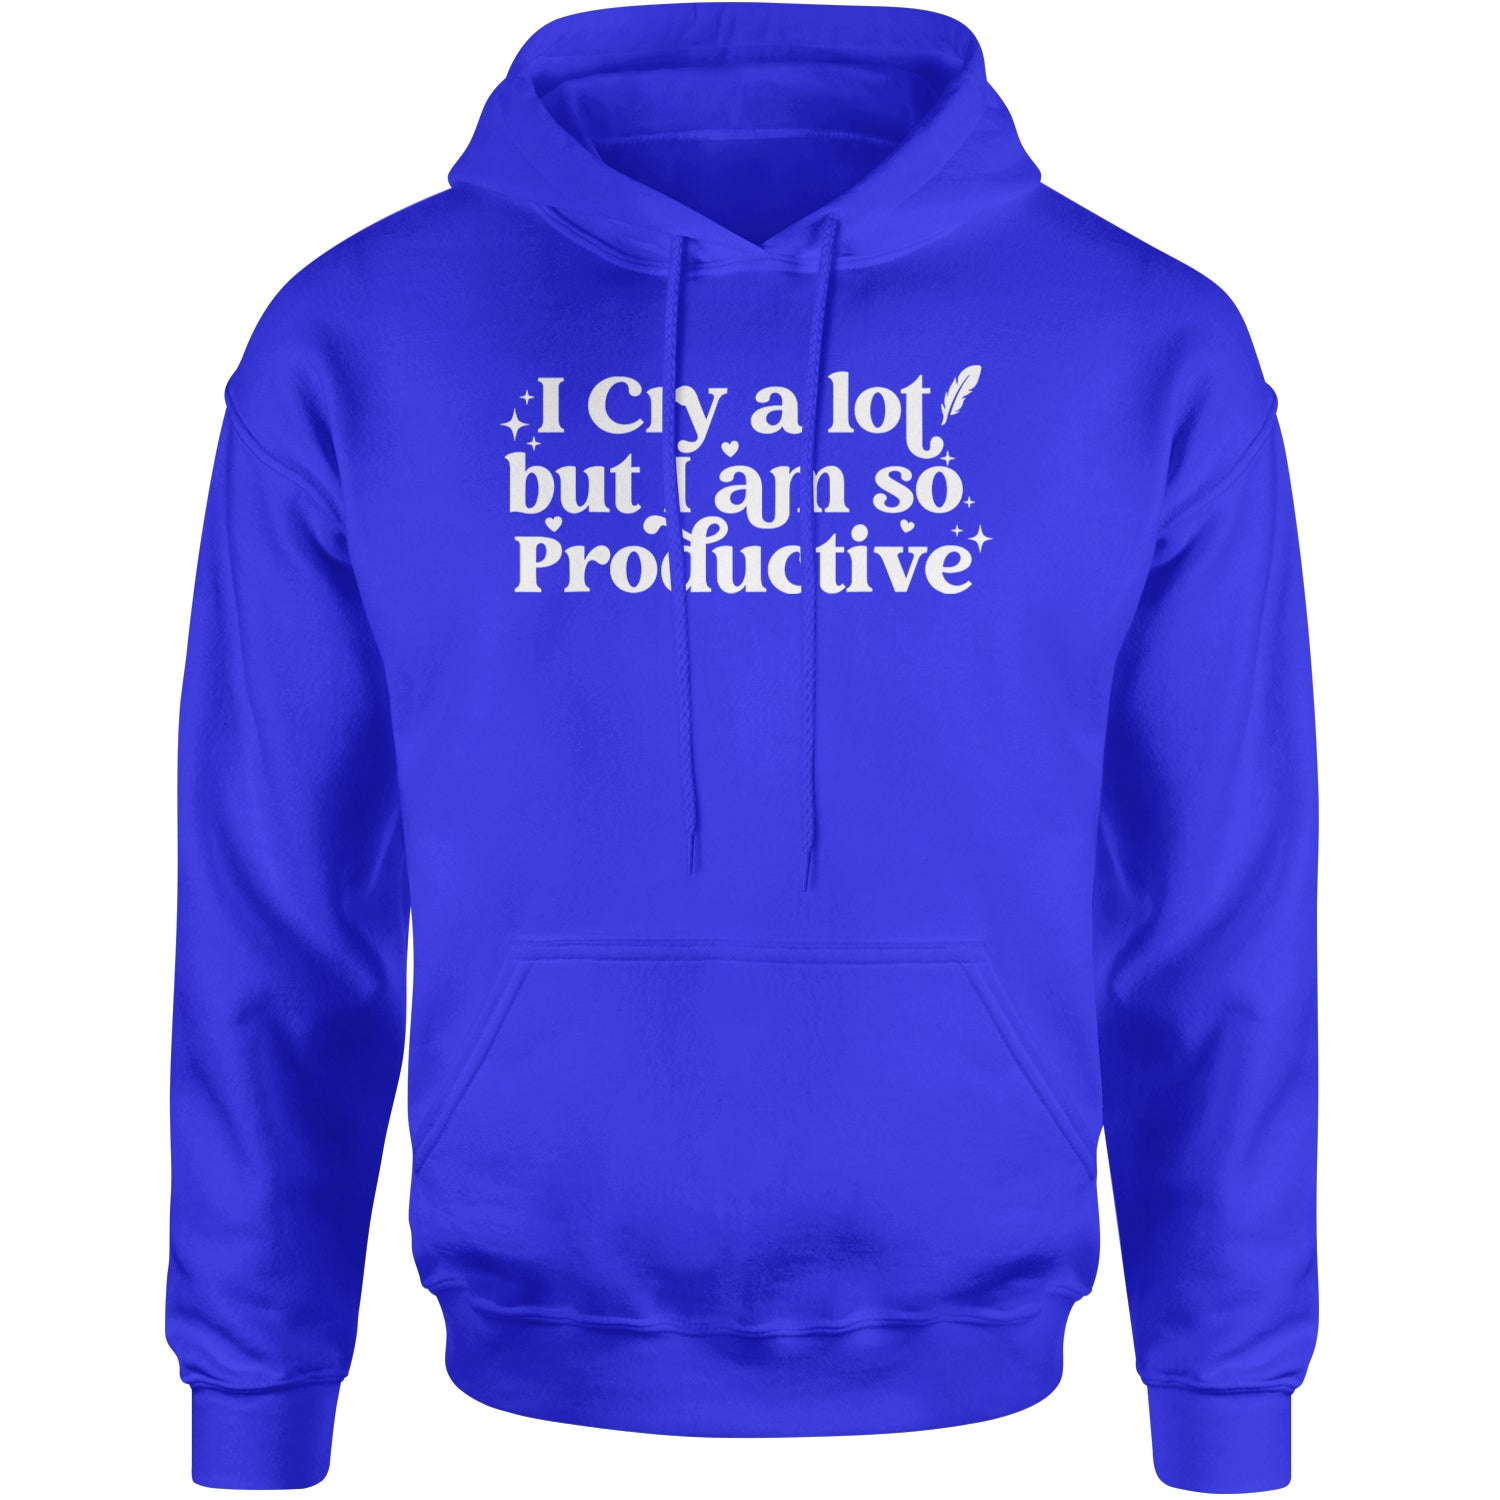 I Cry A Lot But I am So Productive TTPD Adult Hoodie Sweatshirt